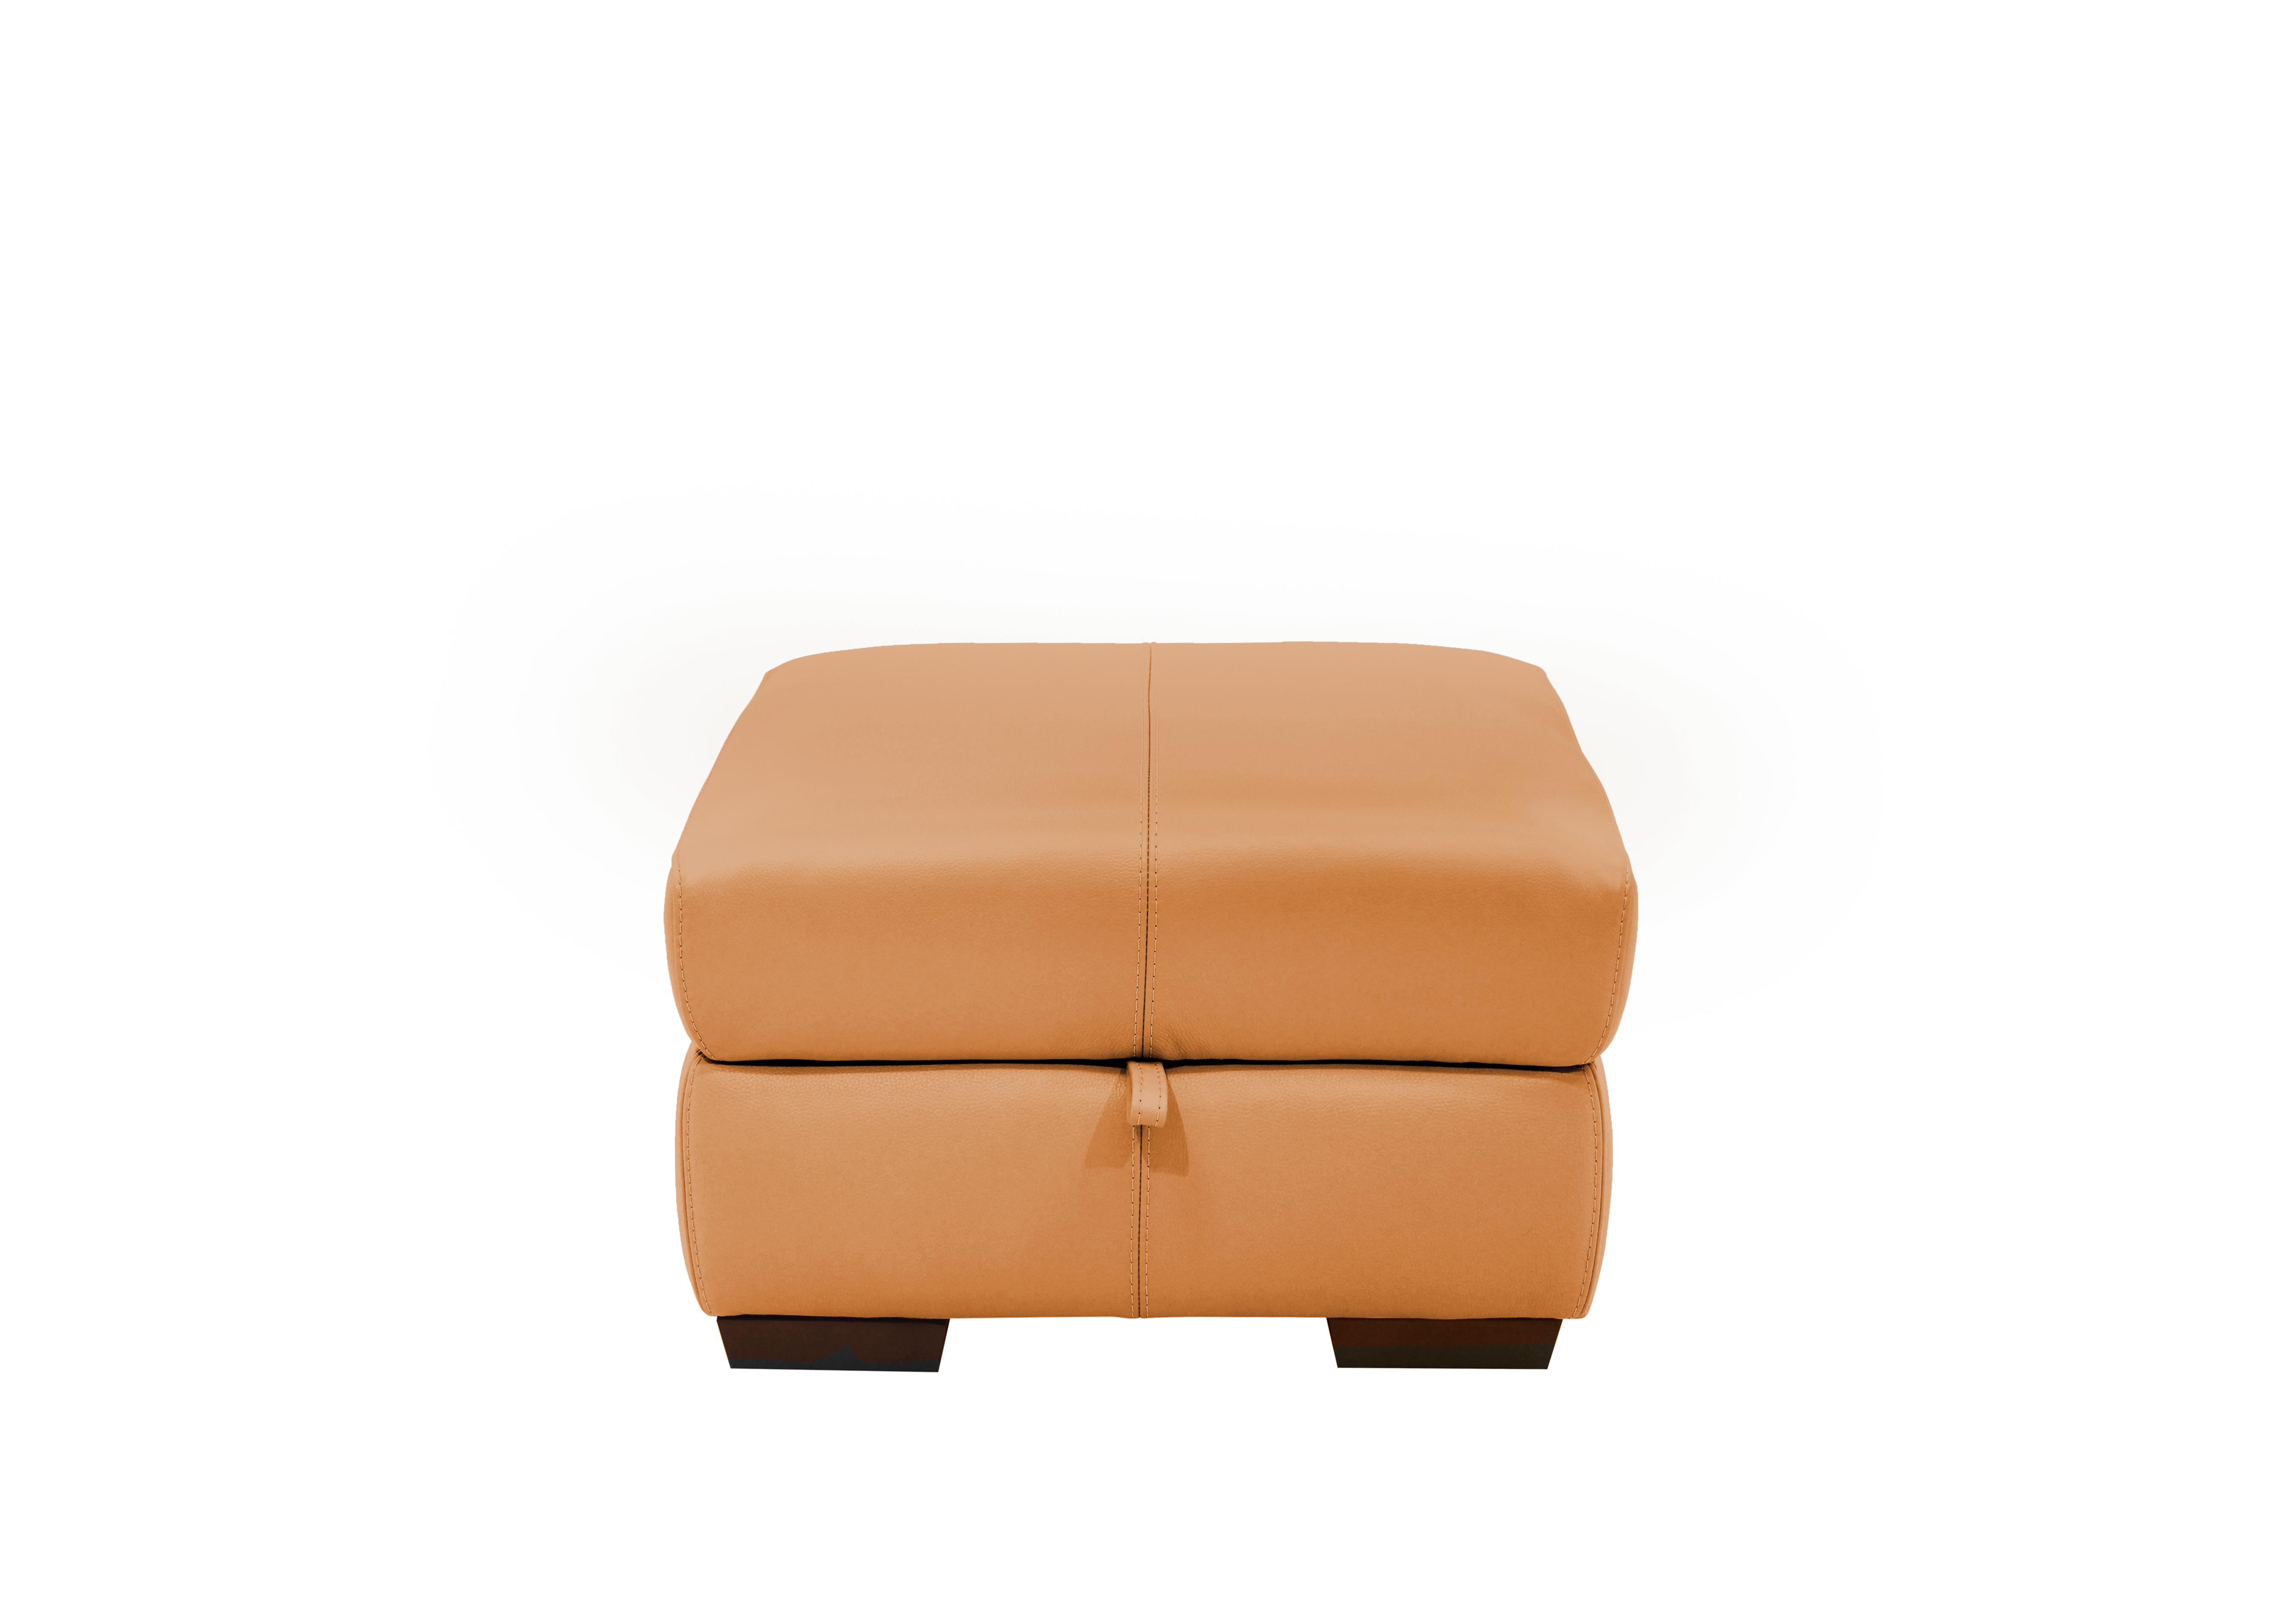 Elixir Leather Storage Footstool in Bv-335e Honey Yellow on Furniture Village